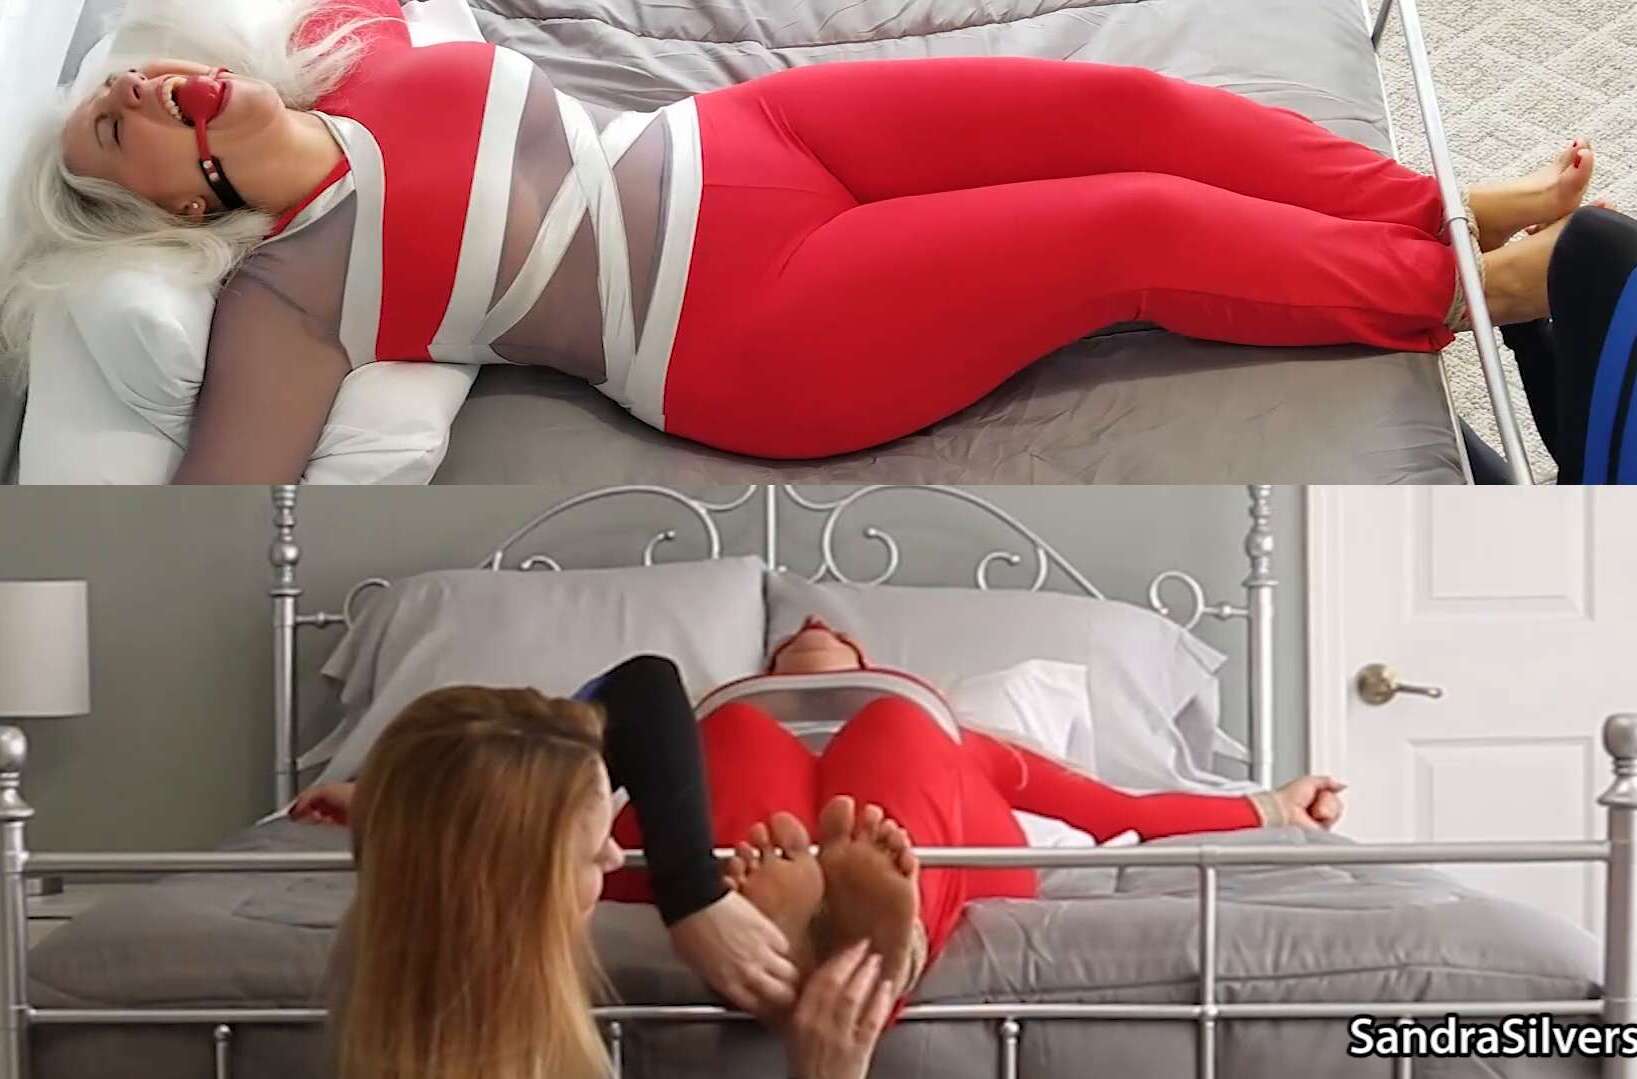 Female Bondage - Hot from a Night Out Dancing, Catsuited Disco-Divas Sandra & Lisa Slip off Stilettos for Tied Up Toe Tickling, Oiled Up Foot Massage and Bare Feet Encasement in Plastic Wrap!